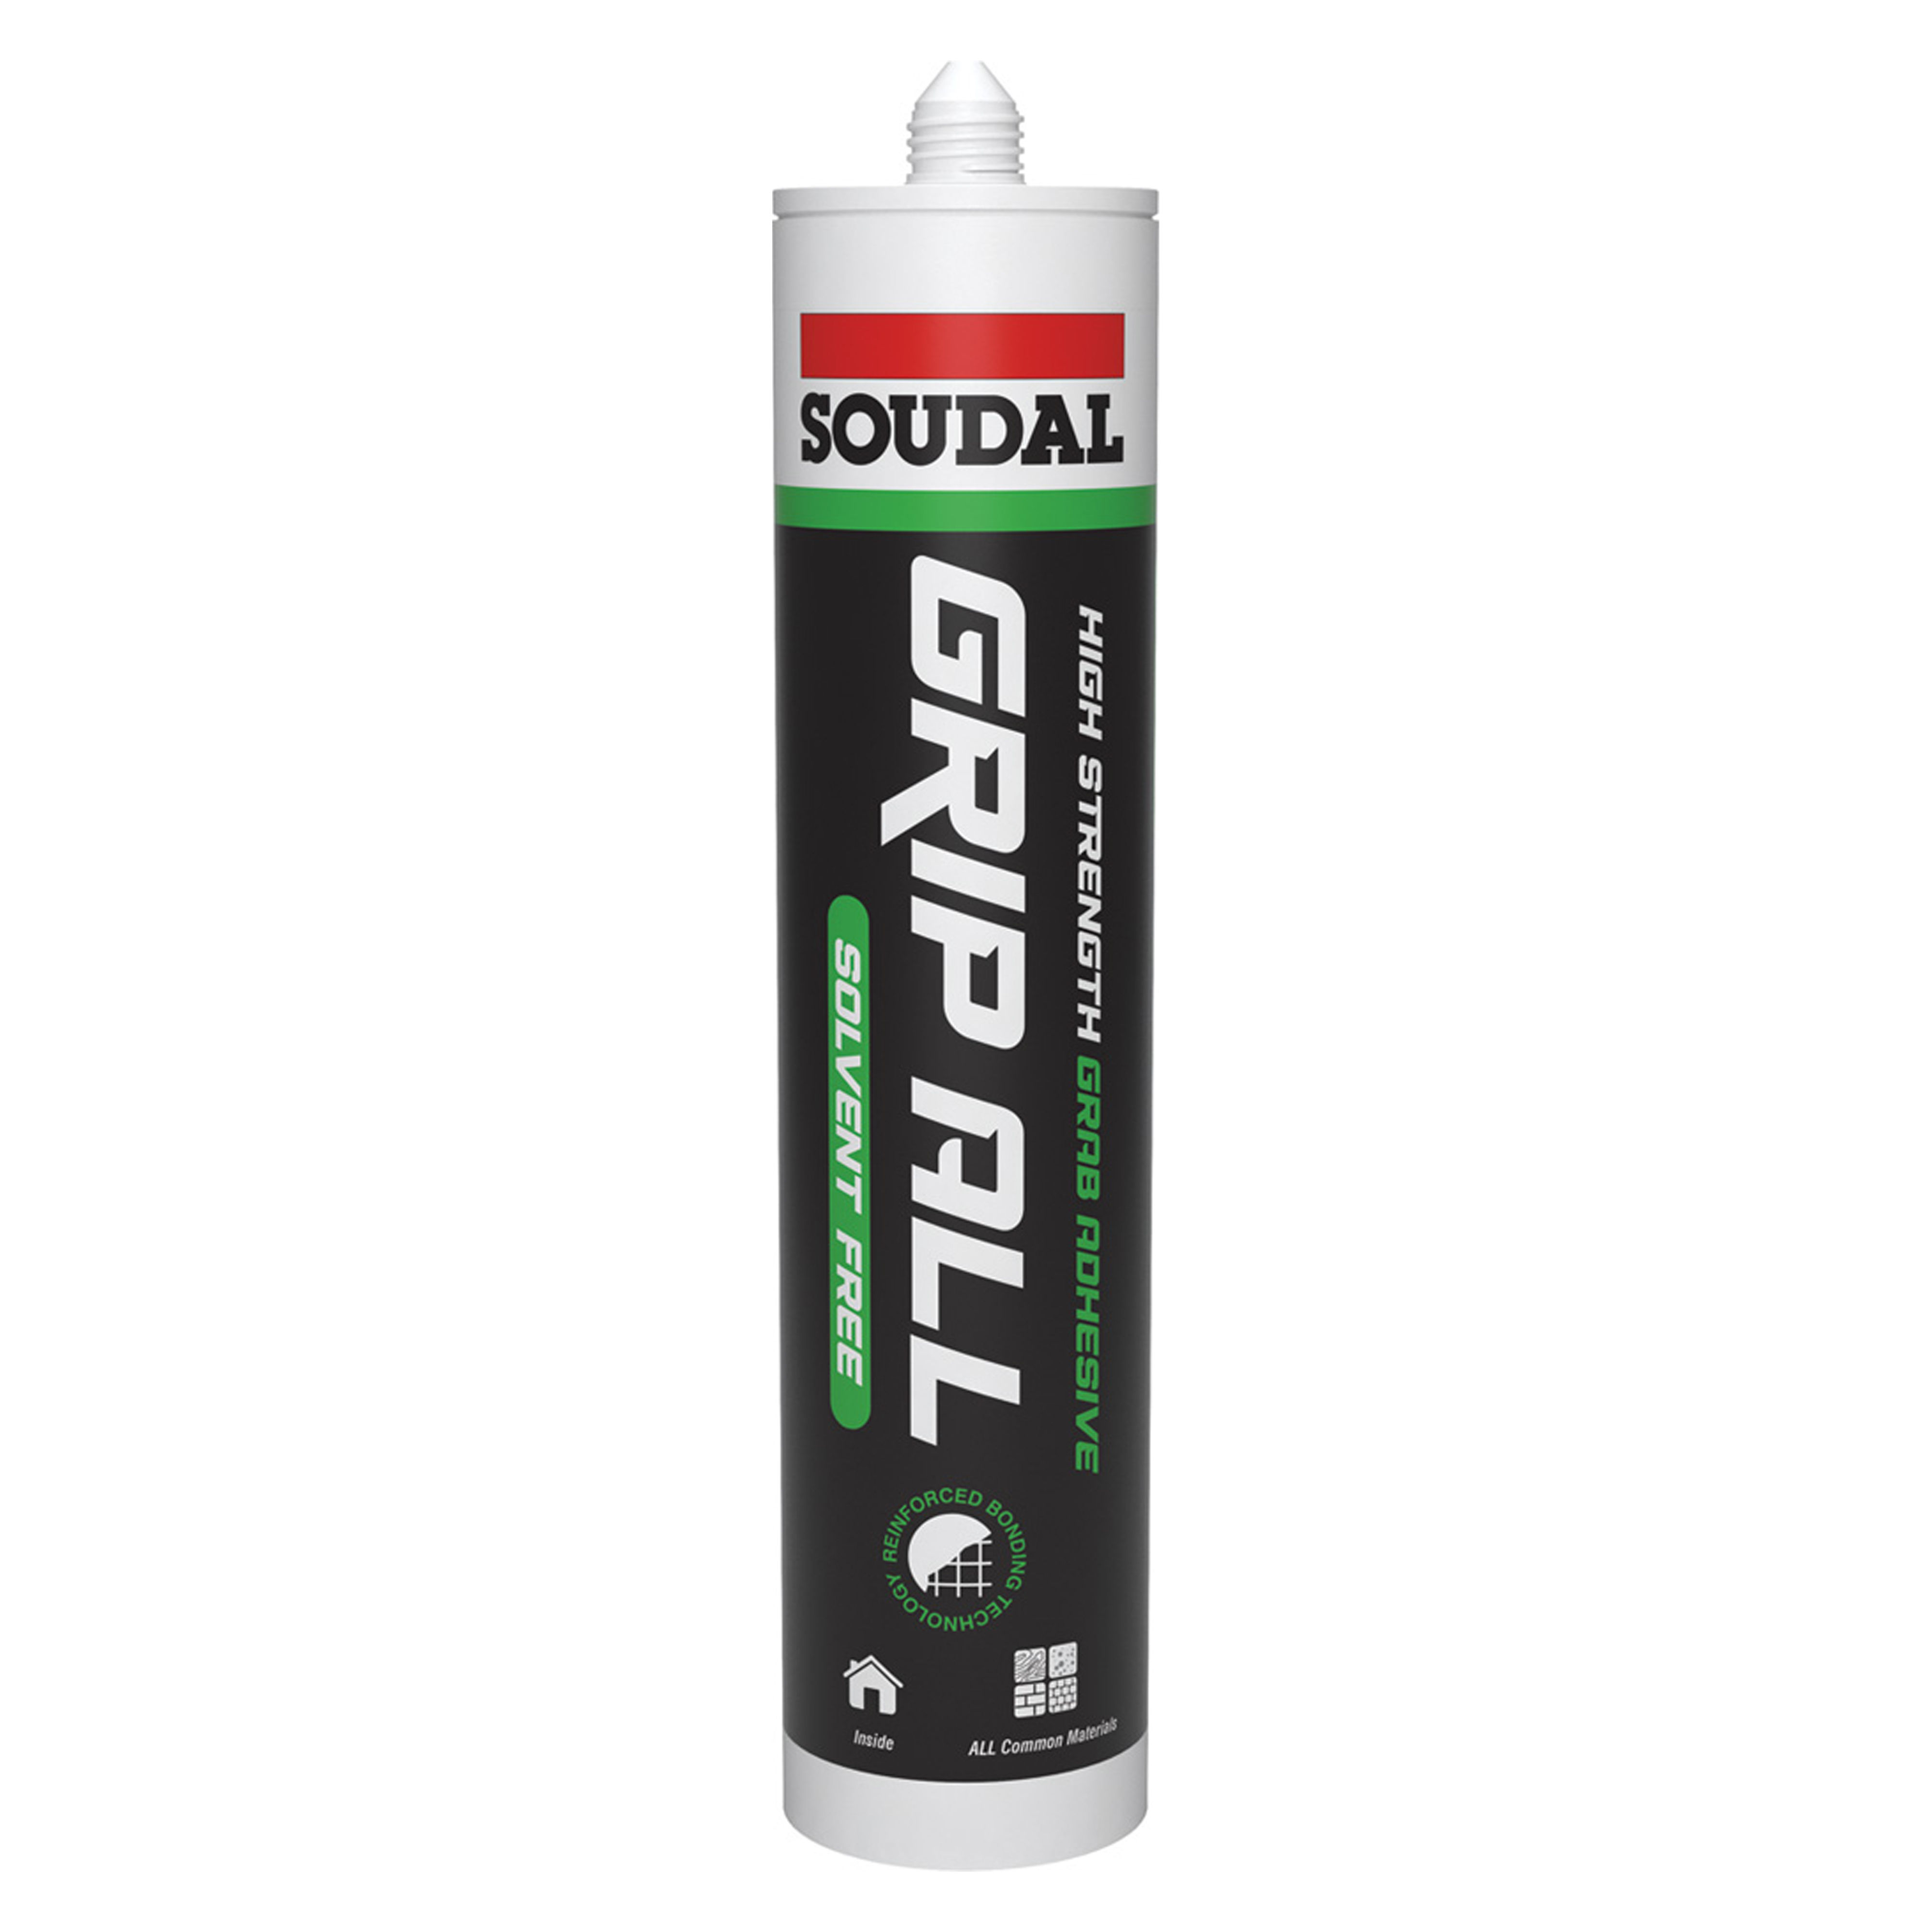 Soudal Grip All Solvent Free White 290ml